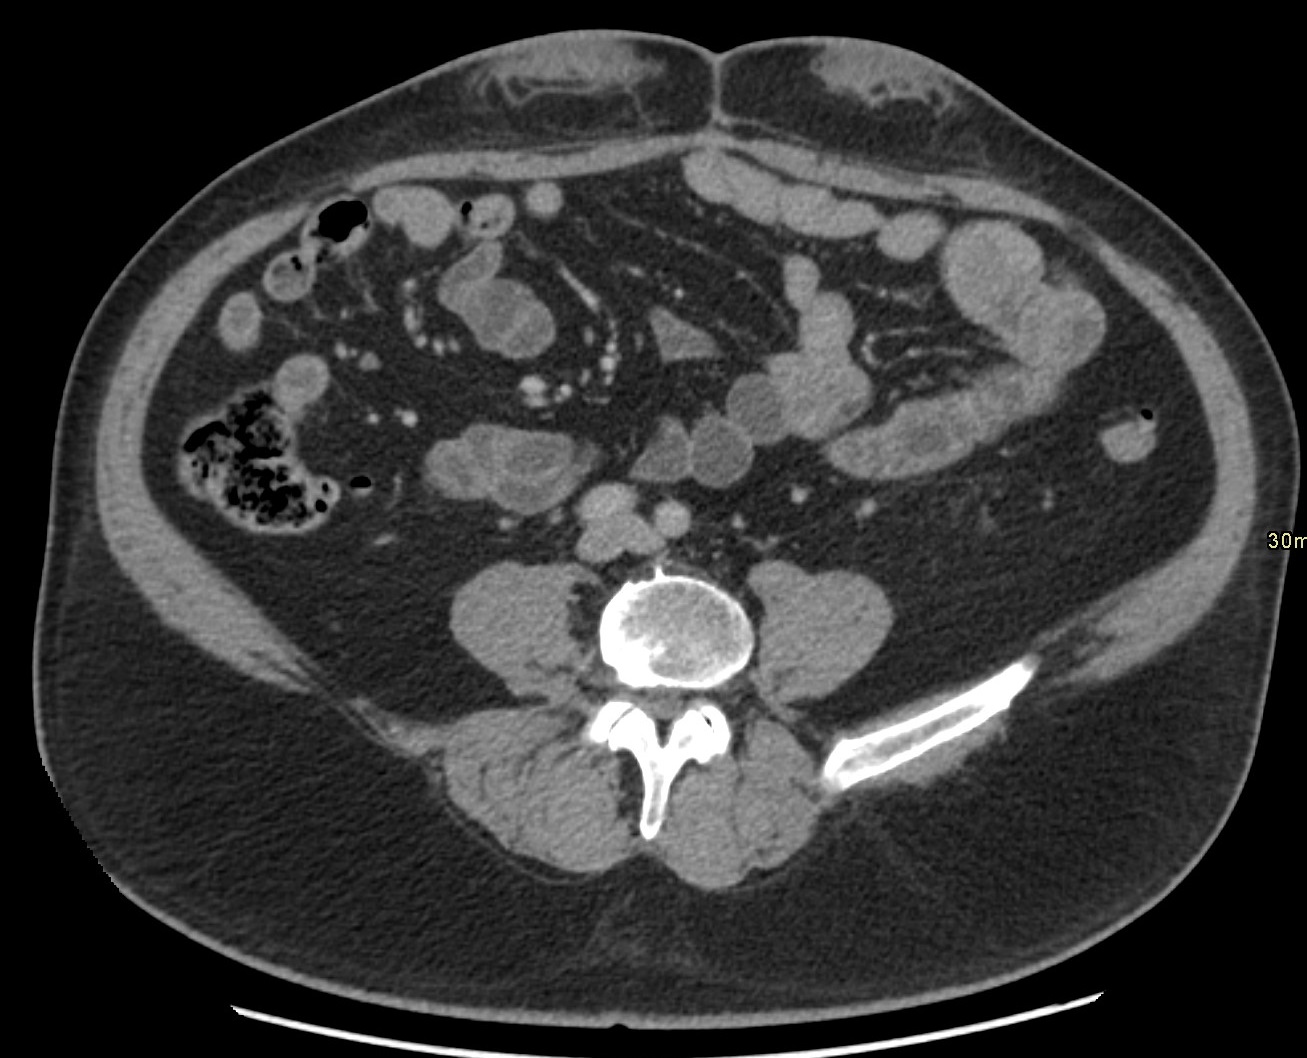 Patient 1: A 59-year-old male with type-2 insulin-dependent diabetes mellitus, chronic kidney disease, and suspected amyloidosis presents for a 4-year follow-up of painful, enlarging ventral abdominal masses corresponding to insulin injection sites